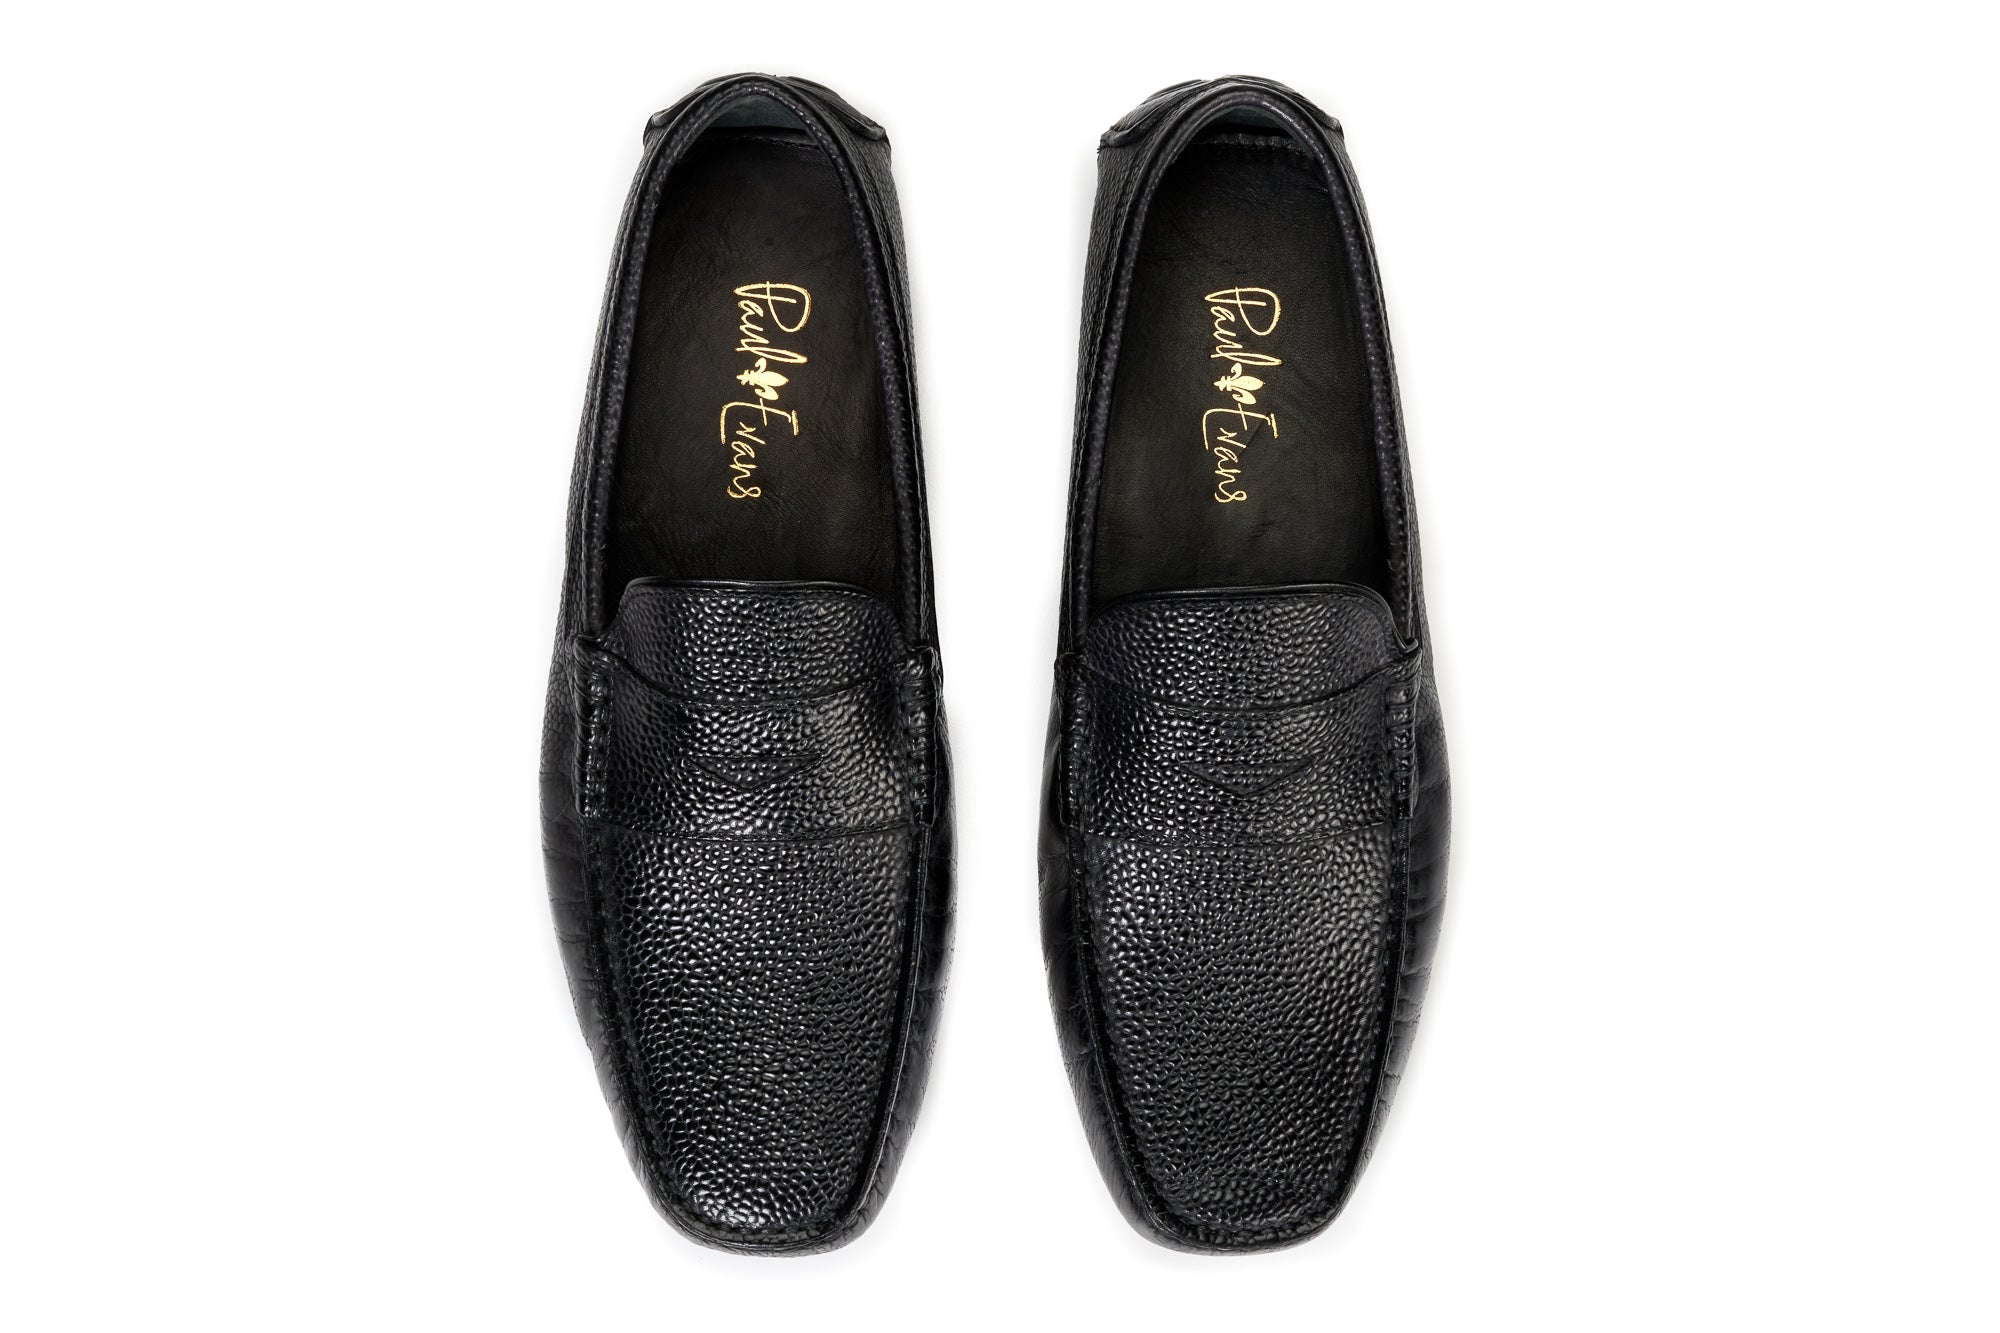 The McQueen Driving Loafer - Nero